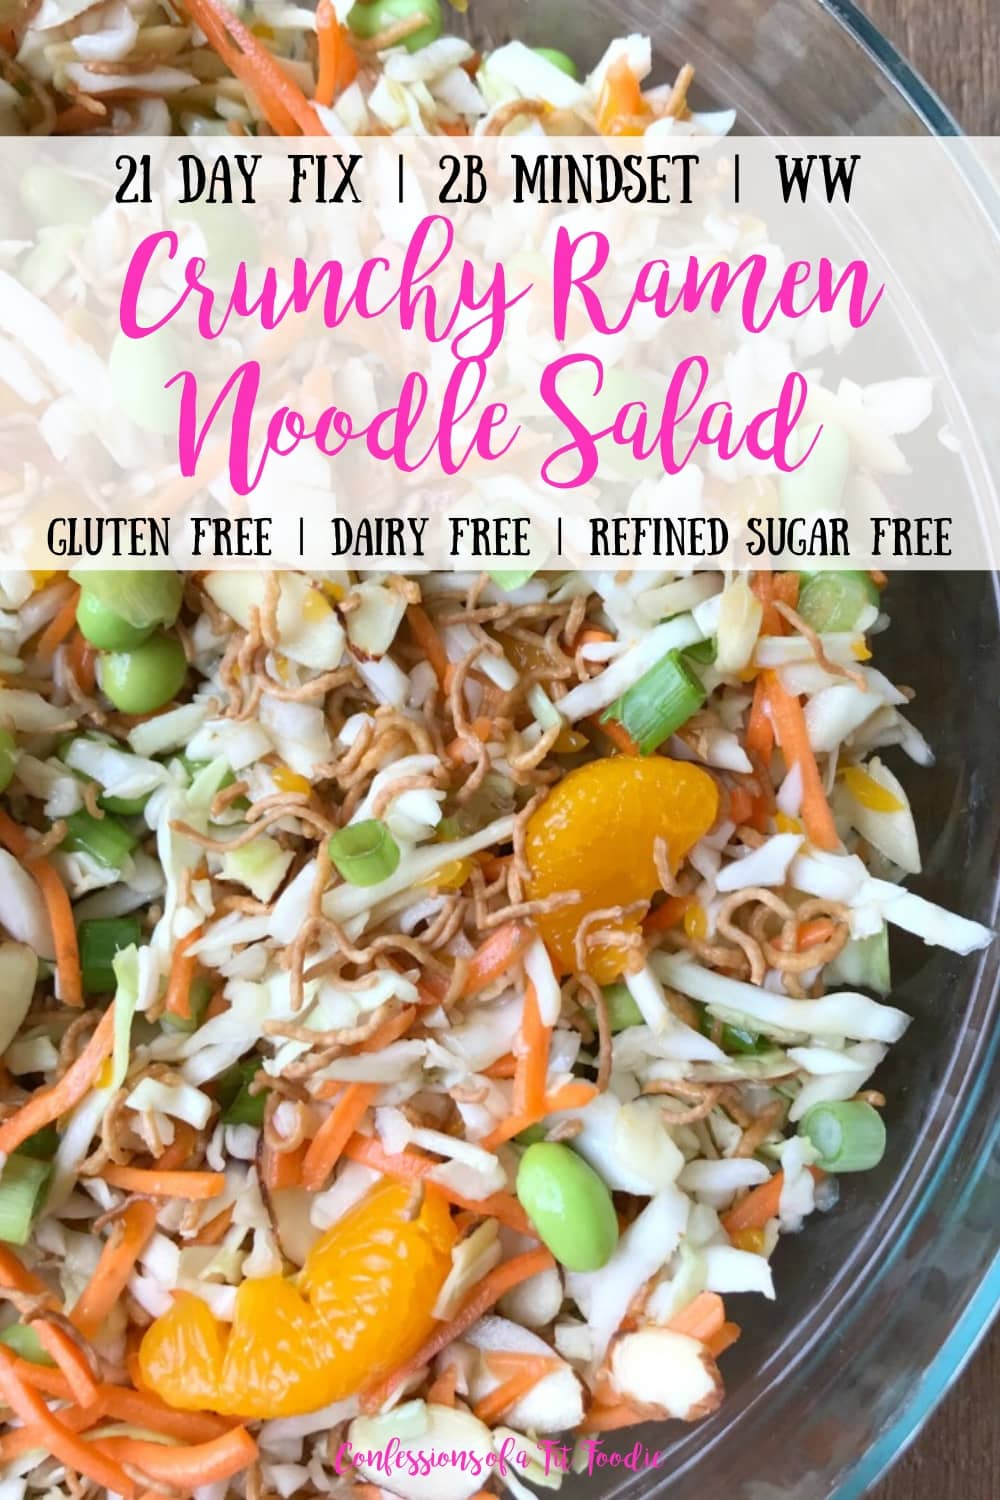 Close up of Ramen Noodle Salad Tossed Together in a glass bowl on a wooden surface. With the text overlay- 21 Day Fix | 2B Mindset | WW | Crunchy Ramen Noodle Salad | Gluten Free | Dairy Free | Refined Sugar Free | Confessions of a Fit Foodie